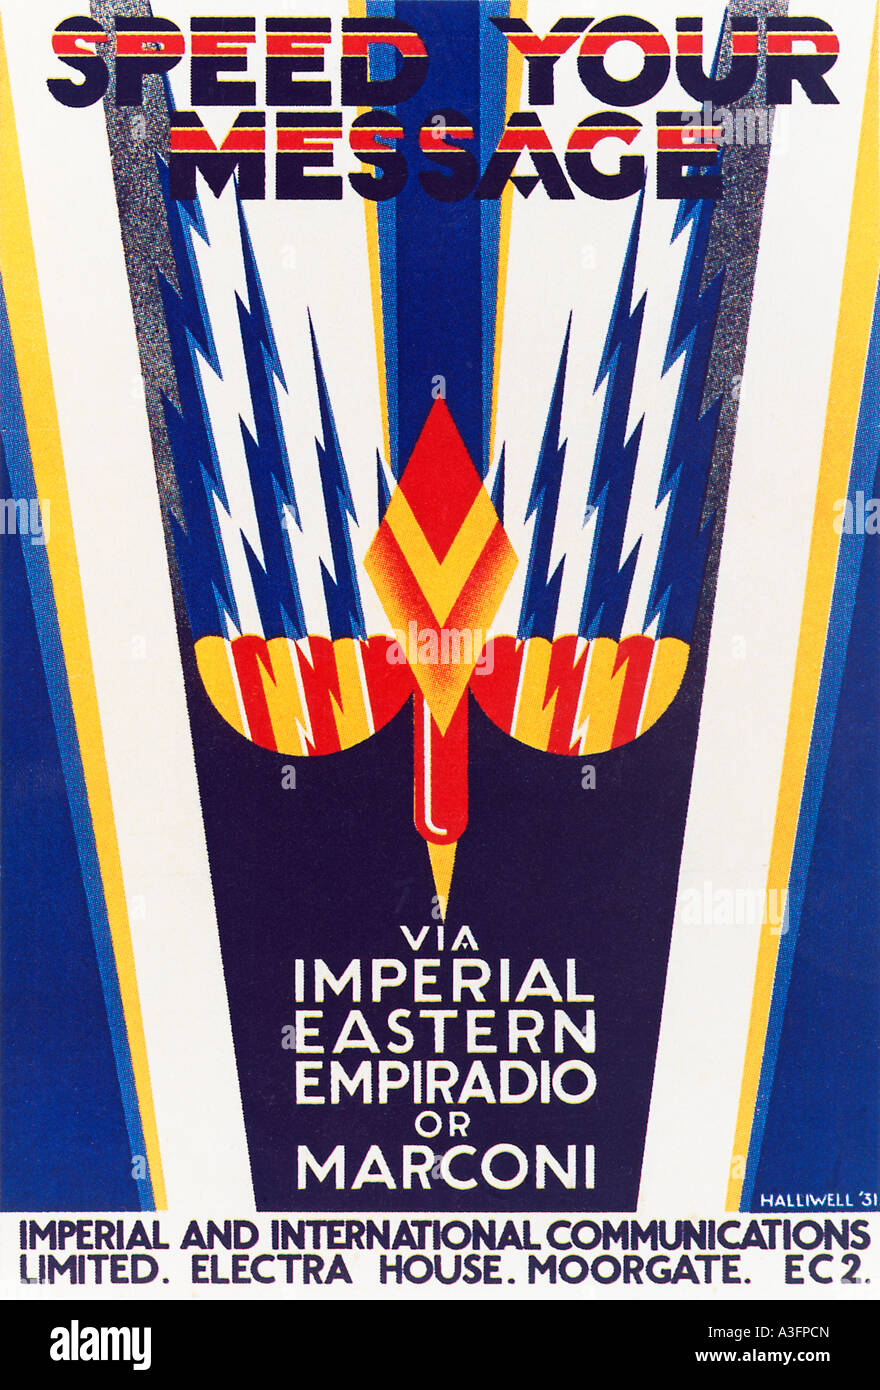 Speed Your Message 1931 poster for the extra service offered through Marconi or Imperial Eastern Empirado Stock Photo